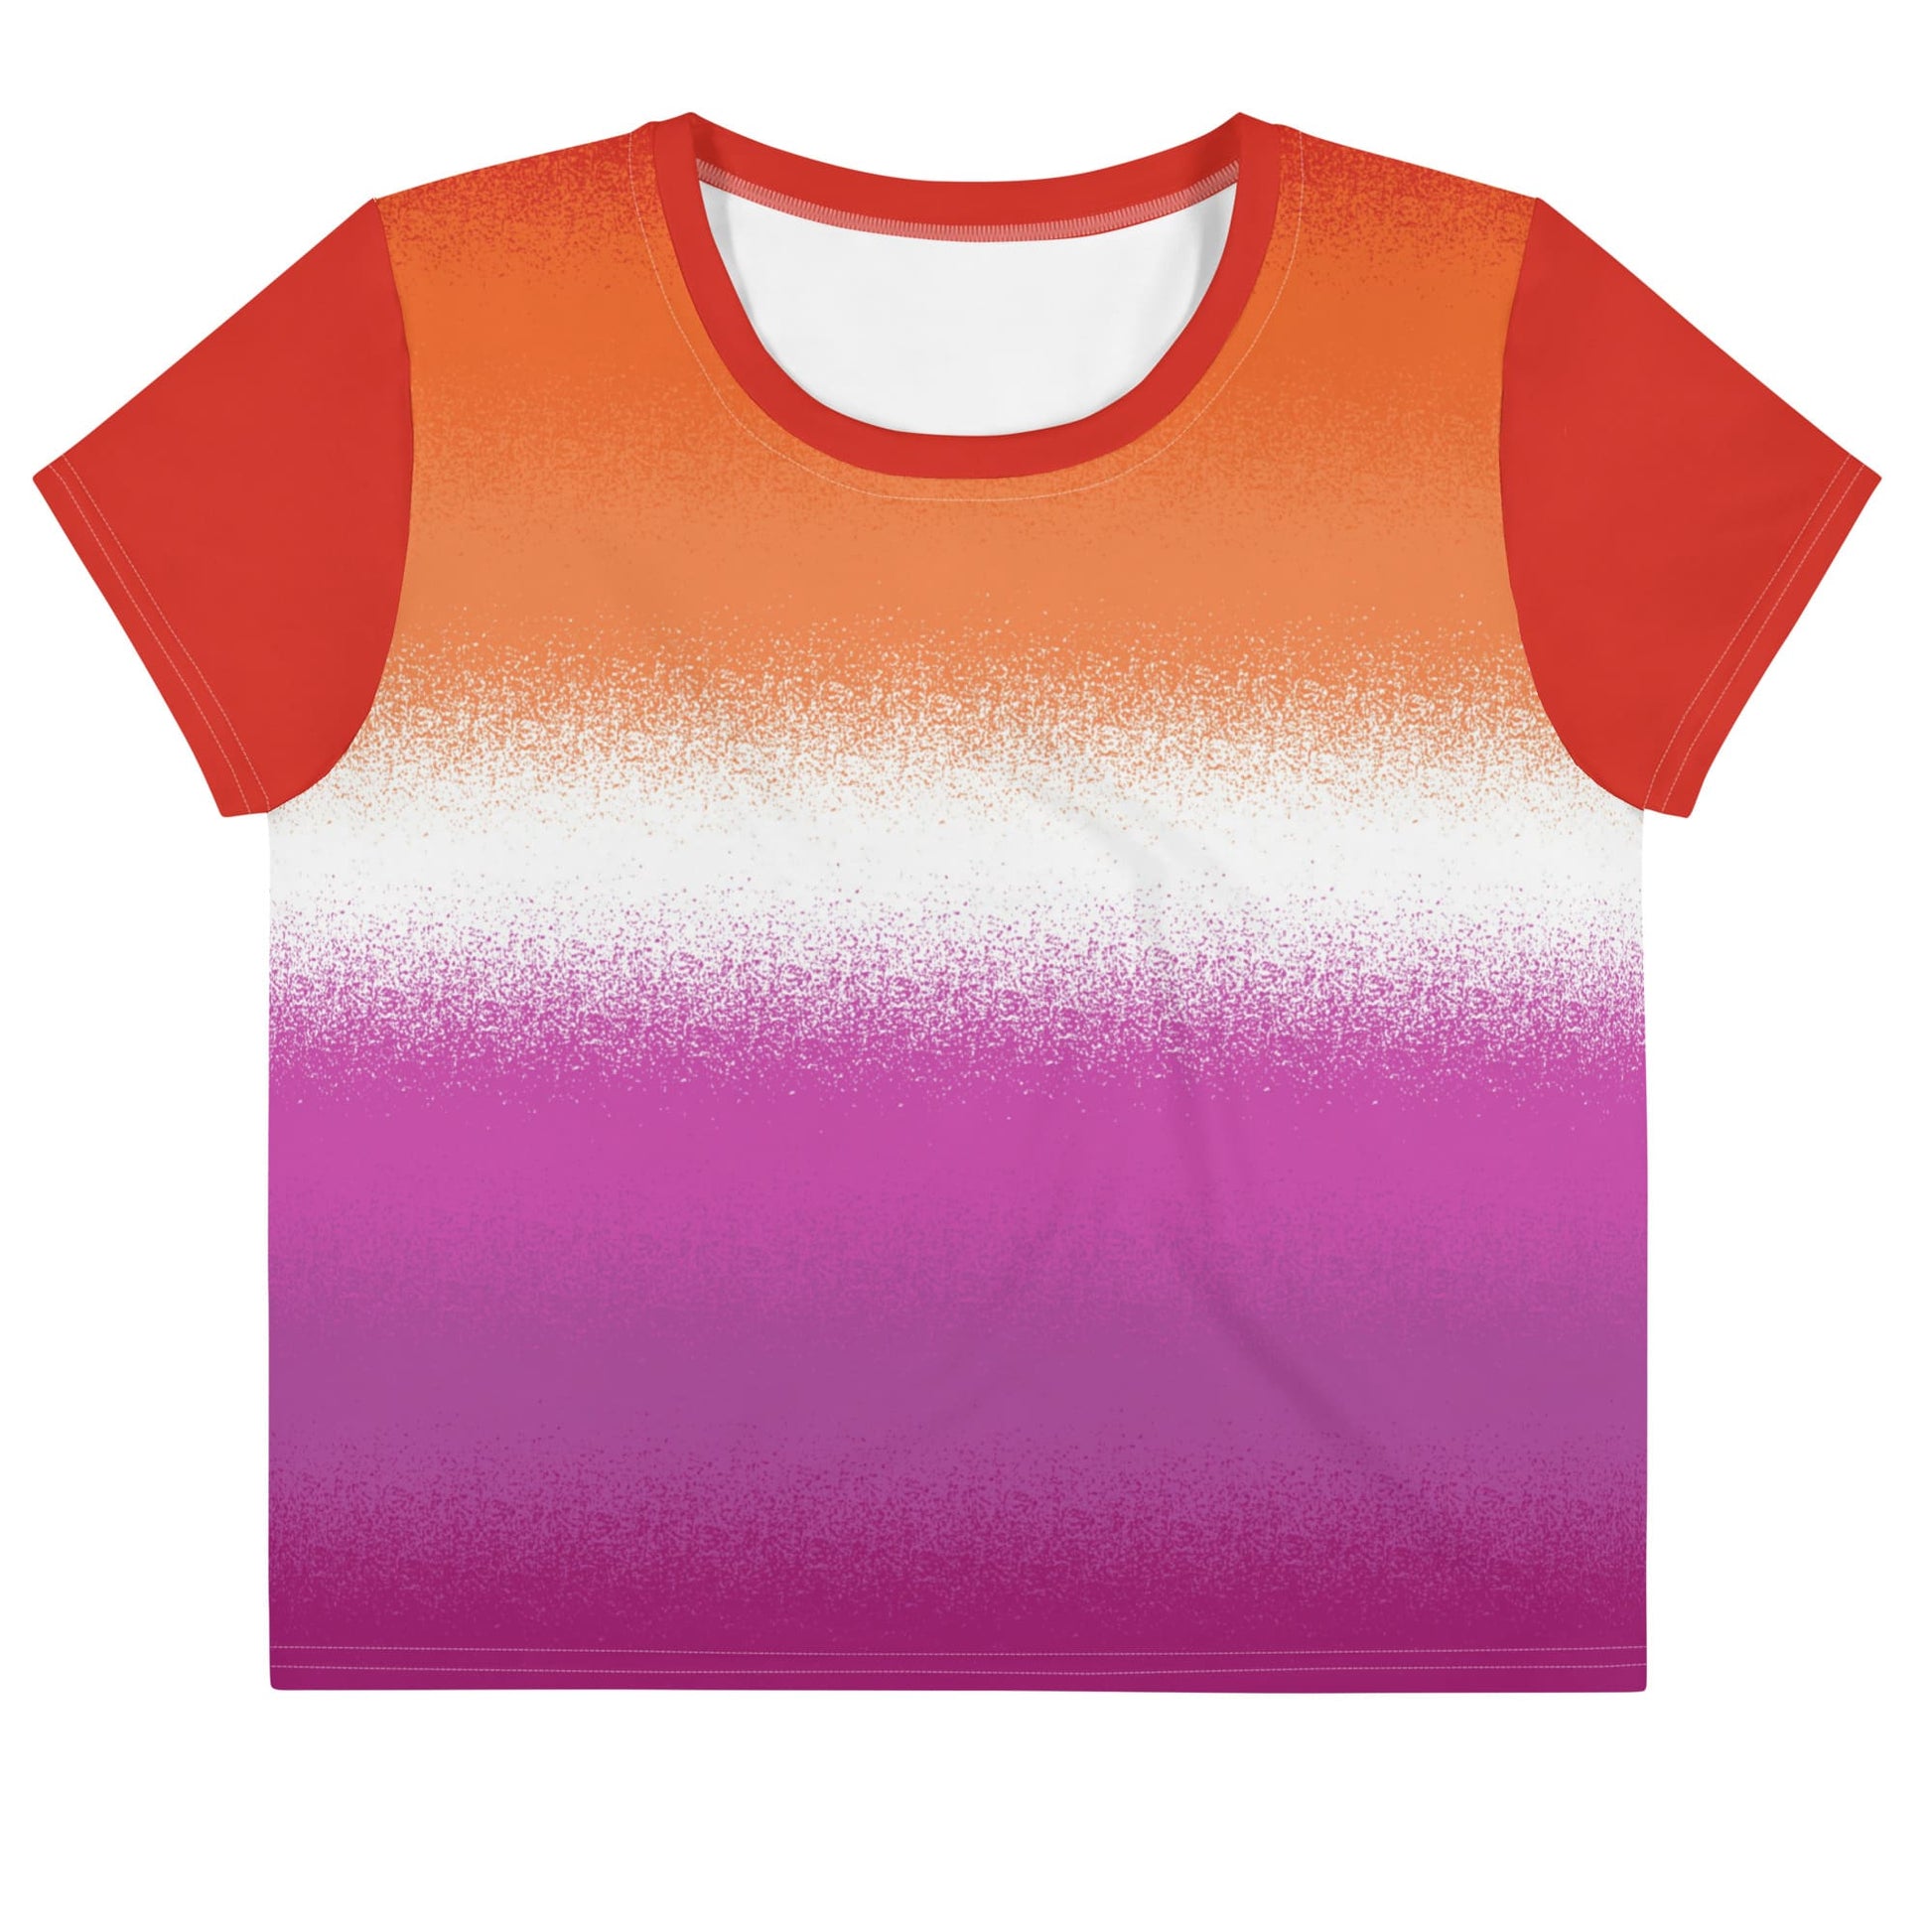 lesbian crop top, sunset flag cropped shirt with wings on back, flatlay front